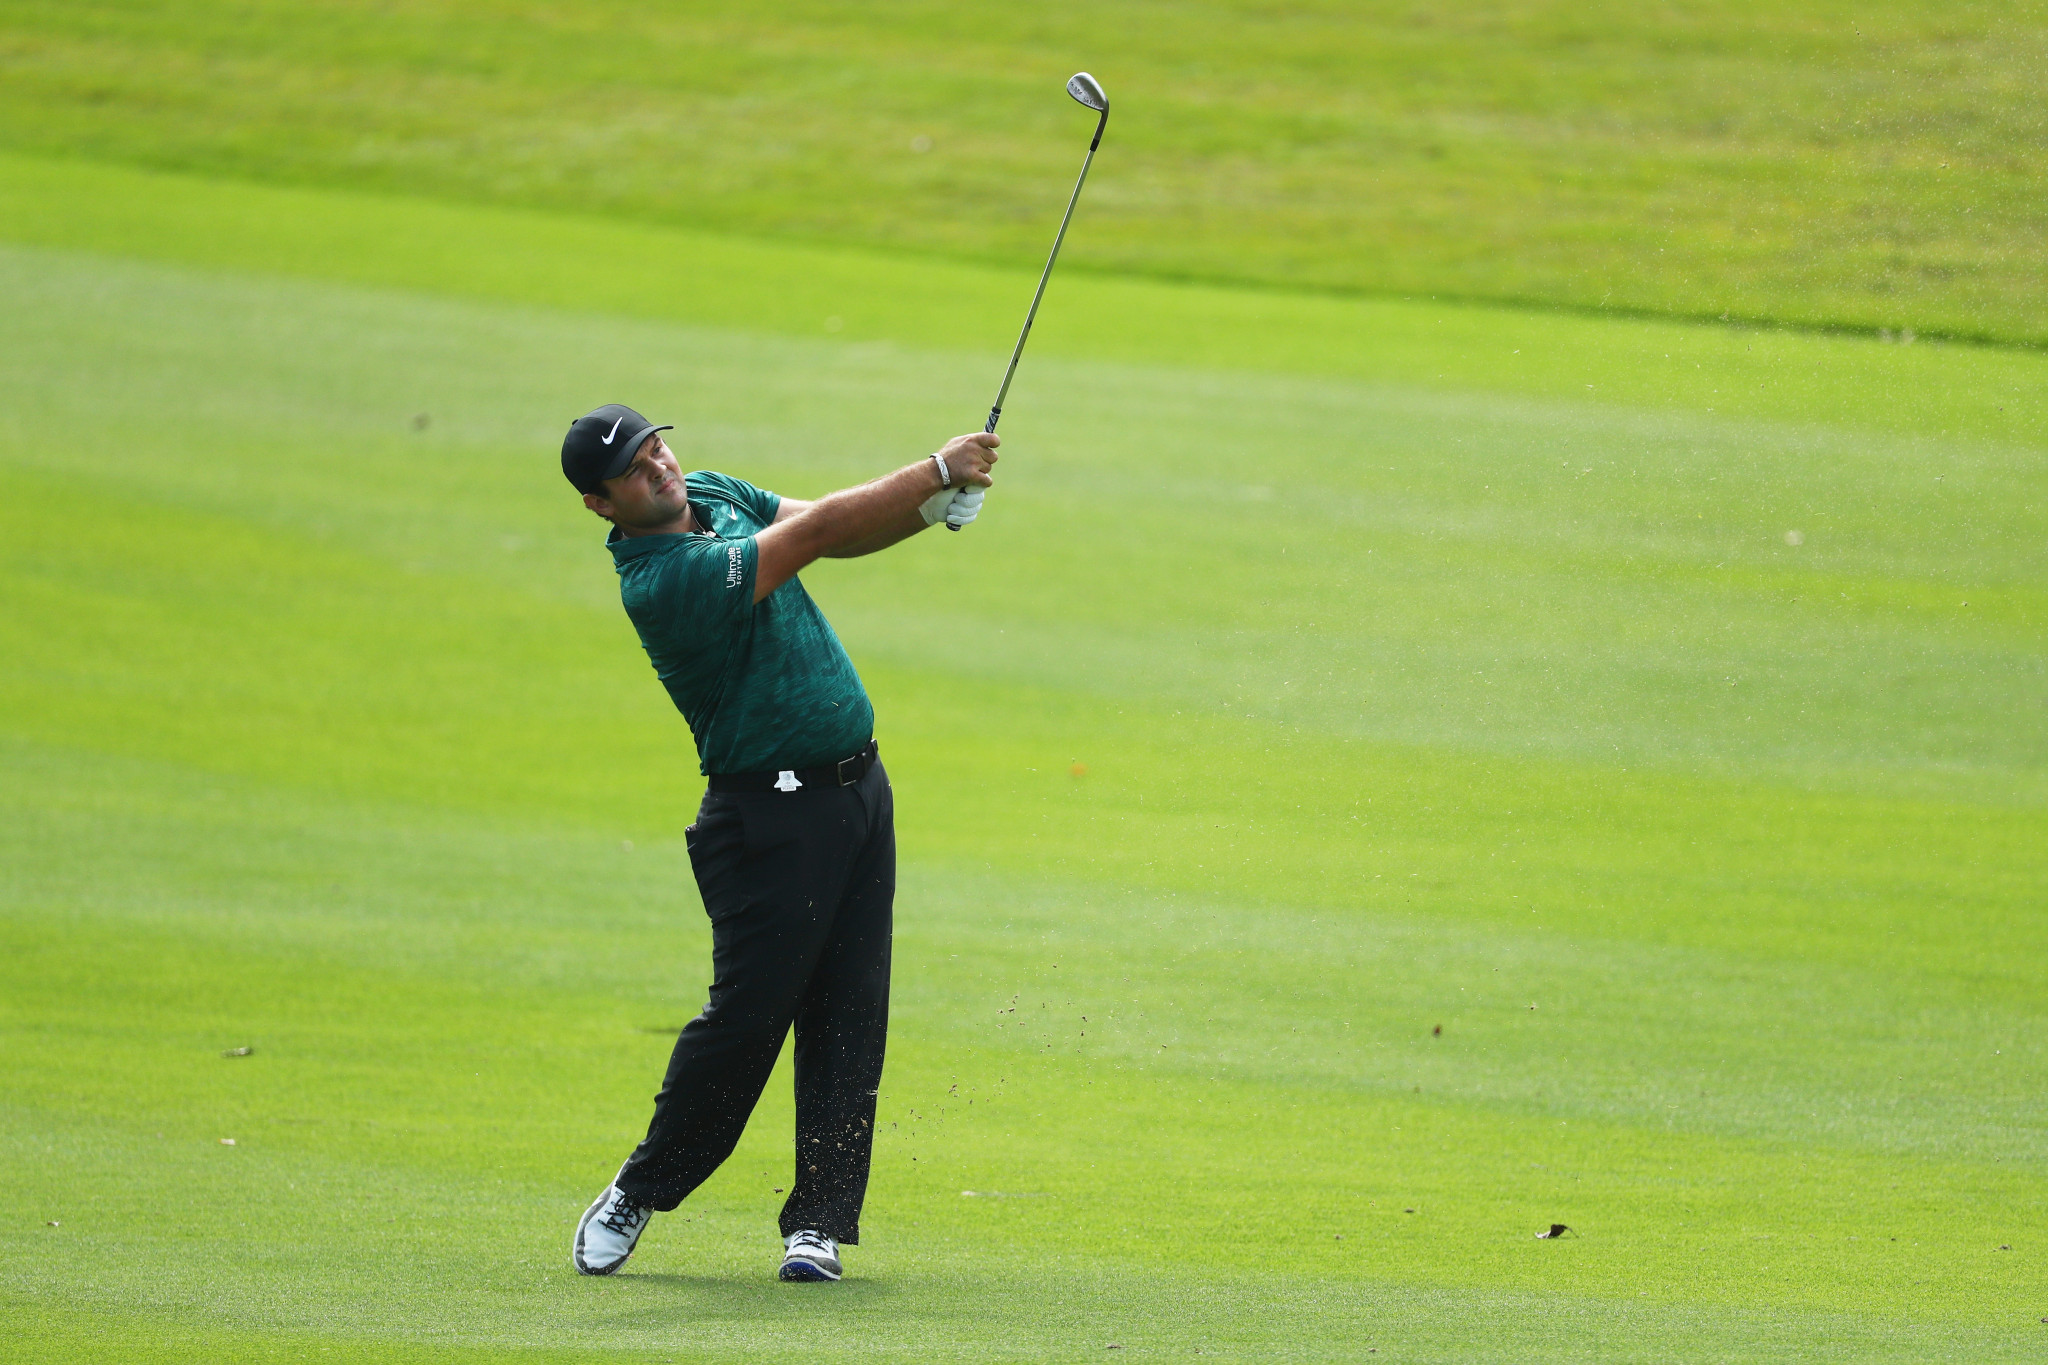 Patrick Reed secured a two shot lead after the opening round in Shanghai ©Getty Images